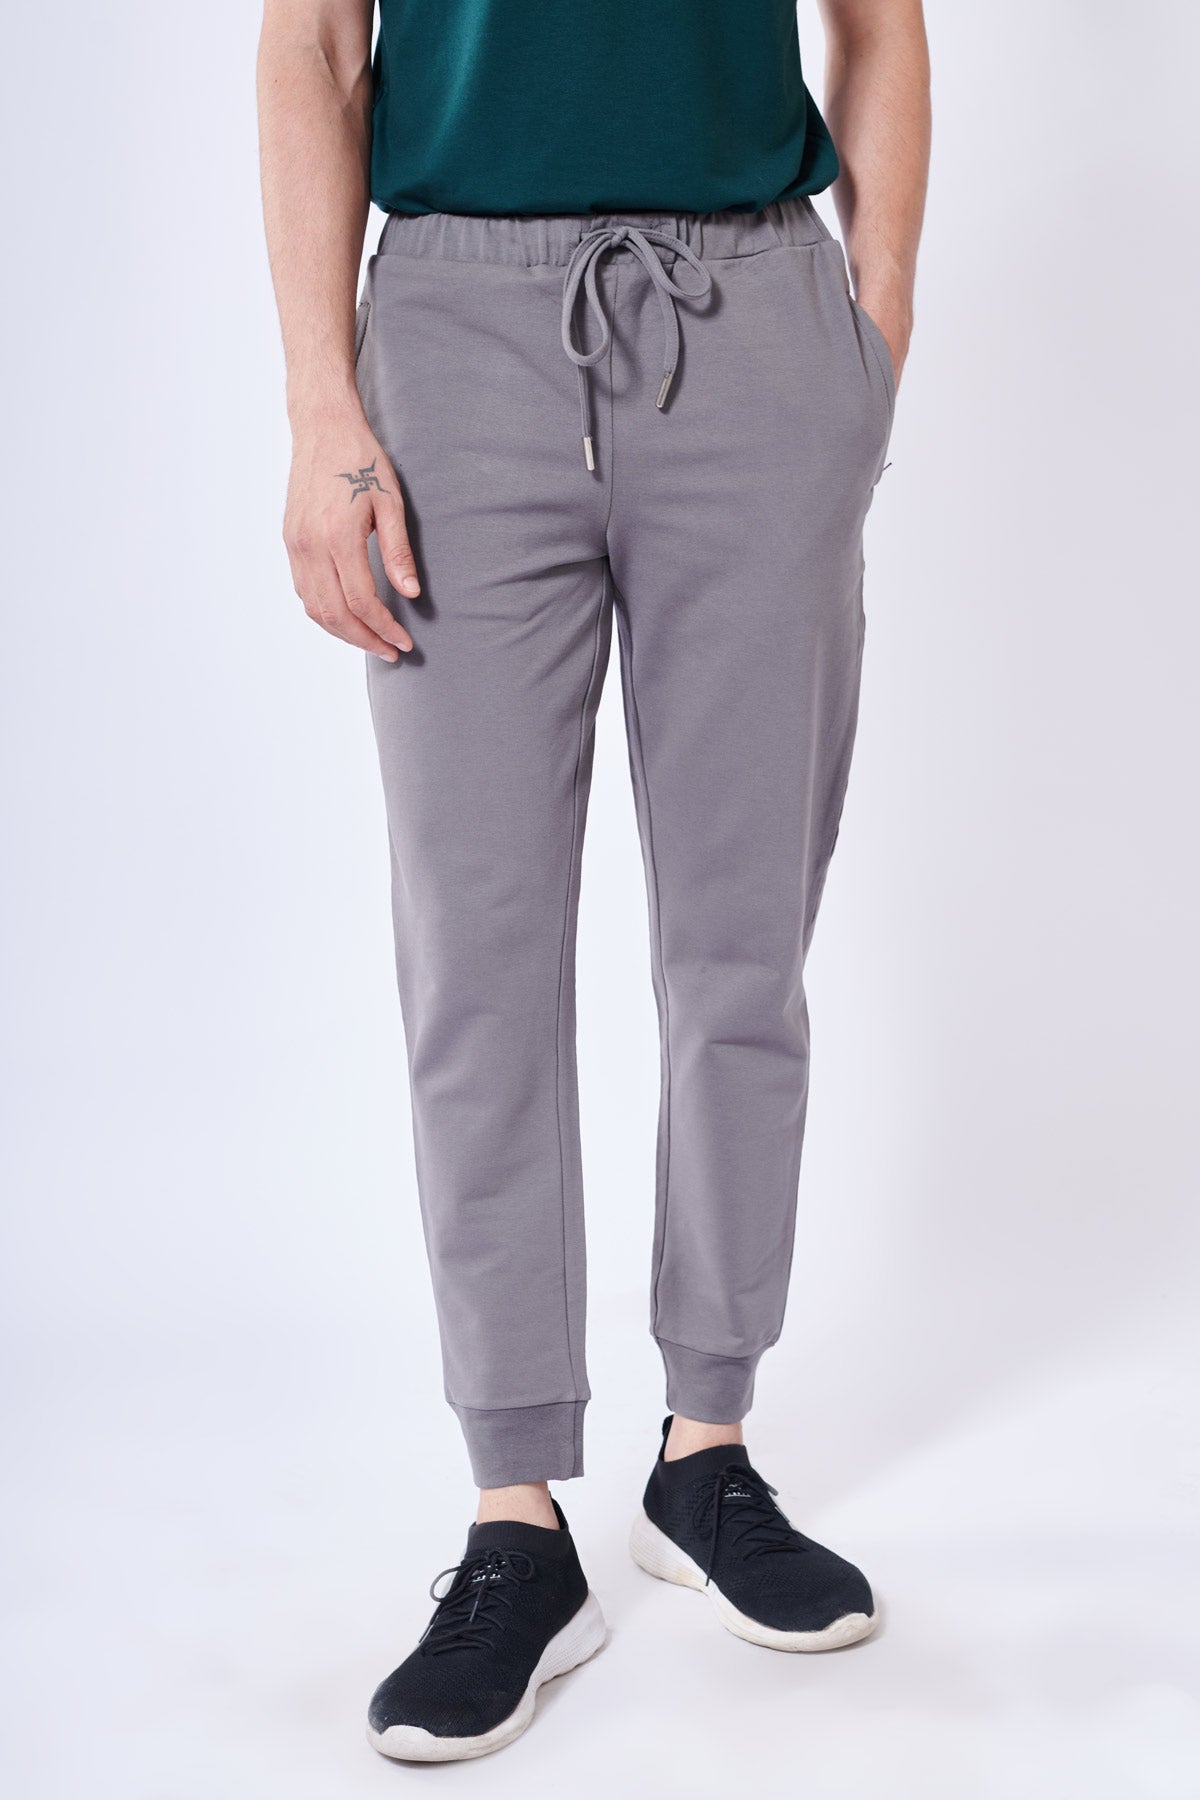 French Grey Sweatpant Beyours